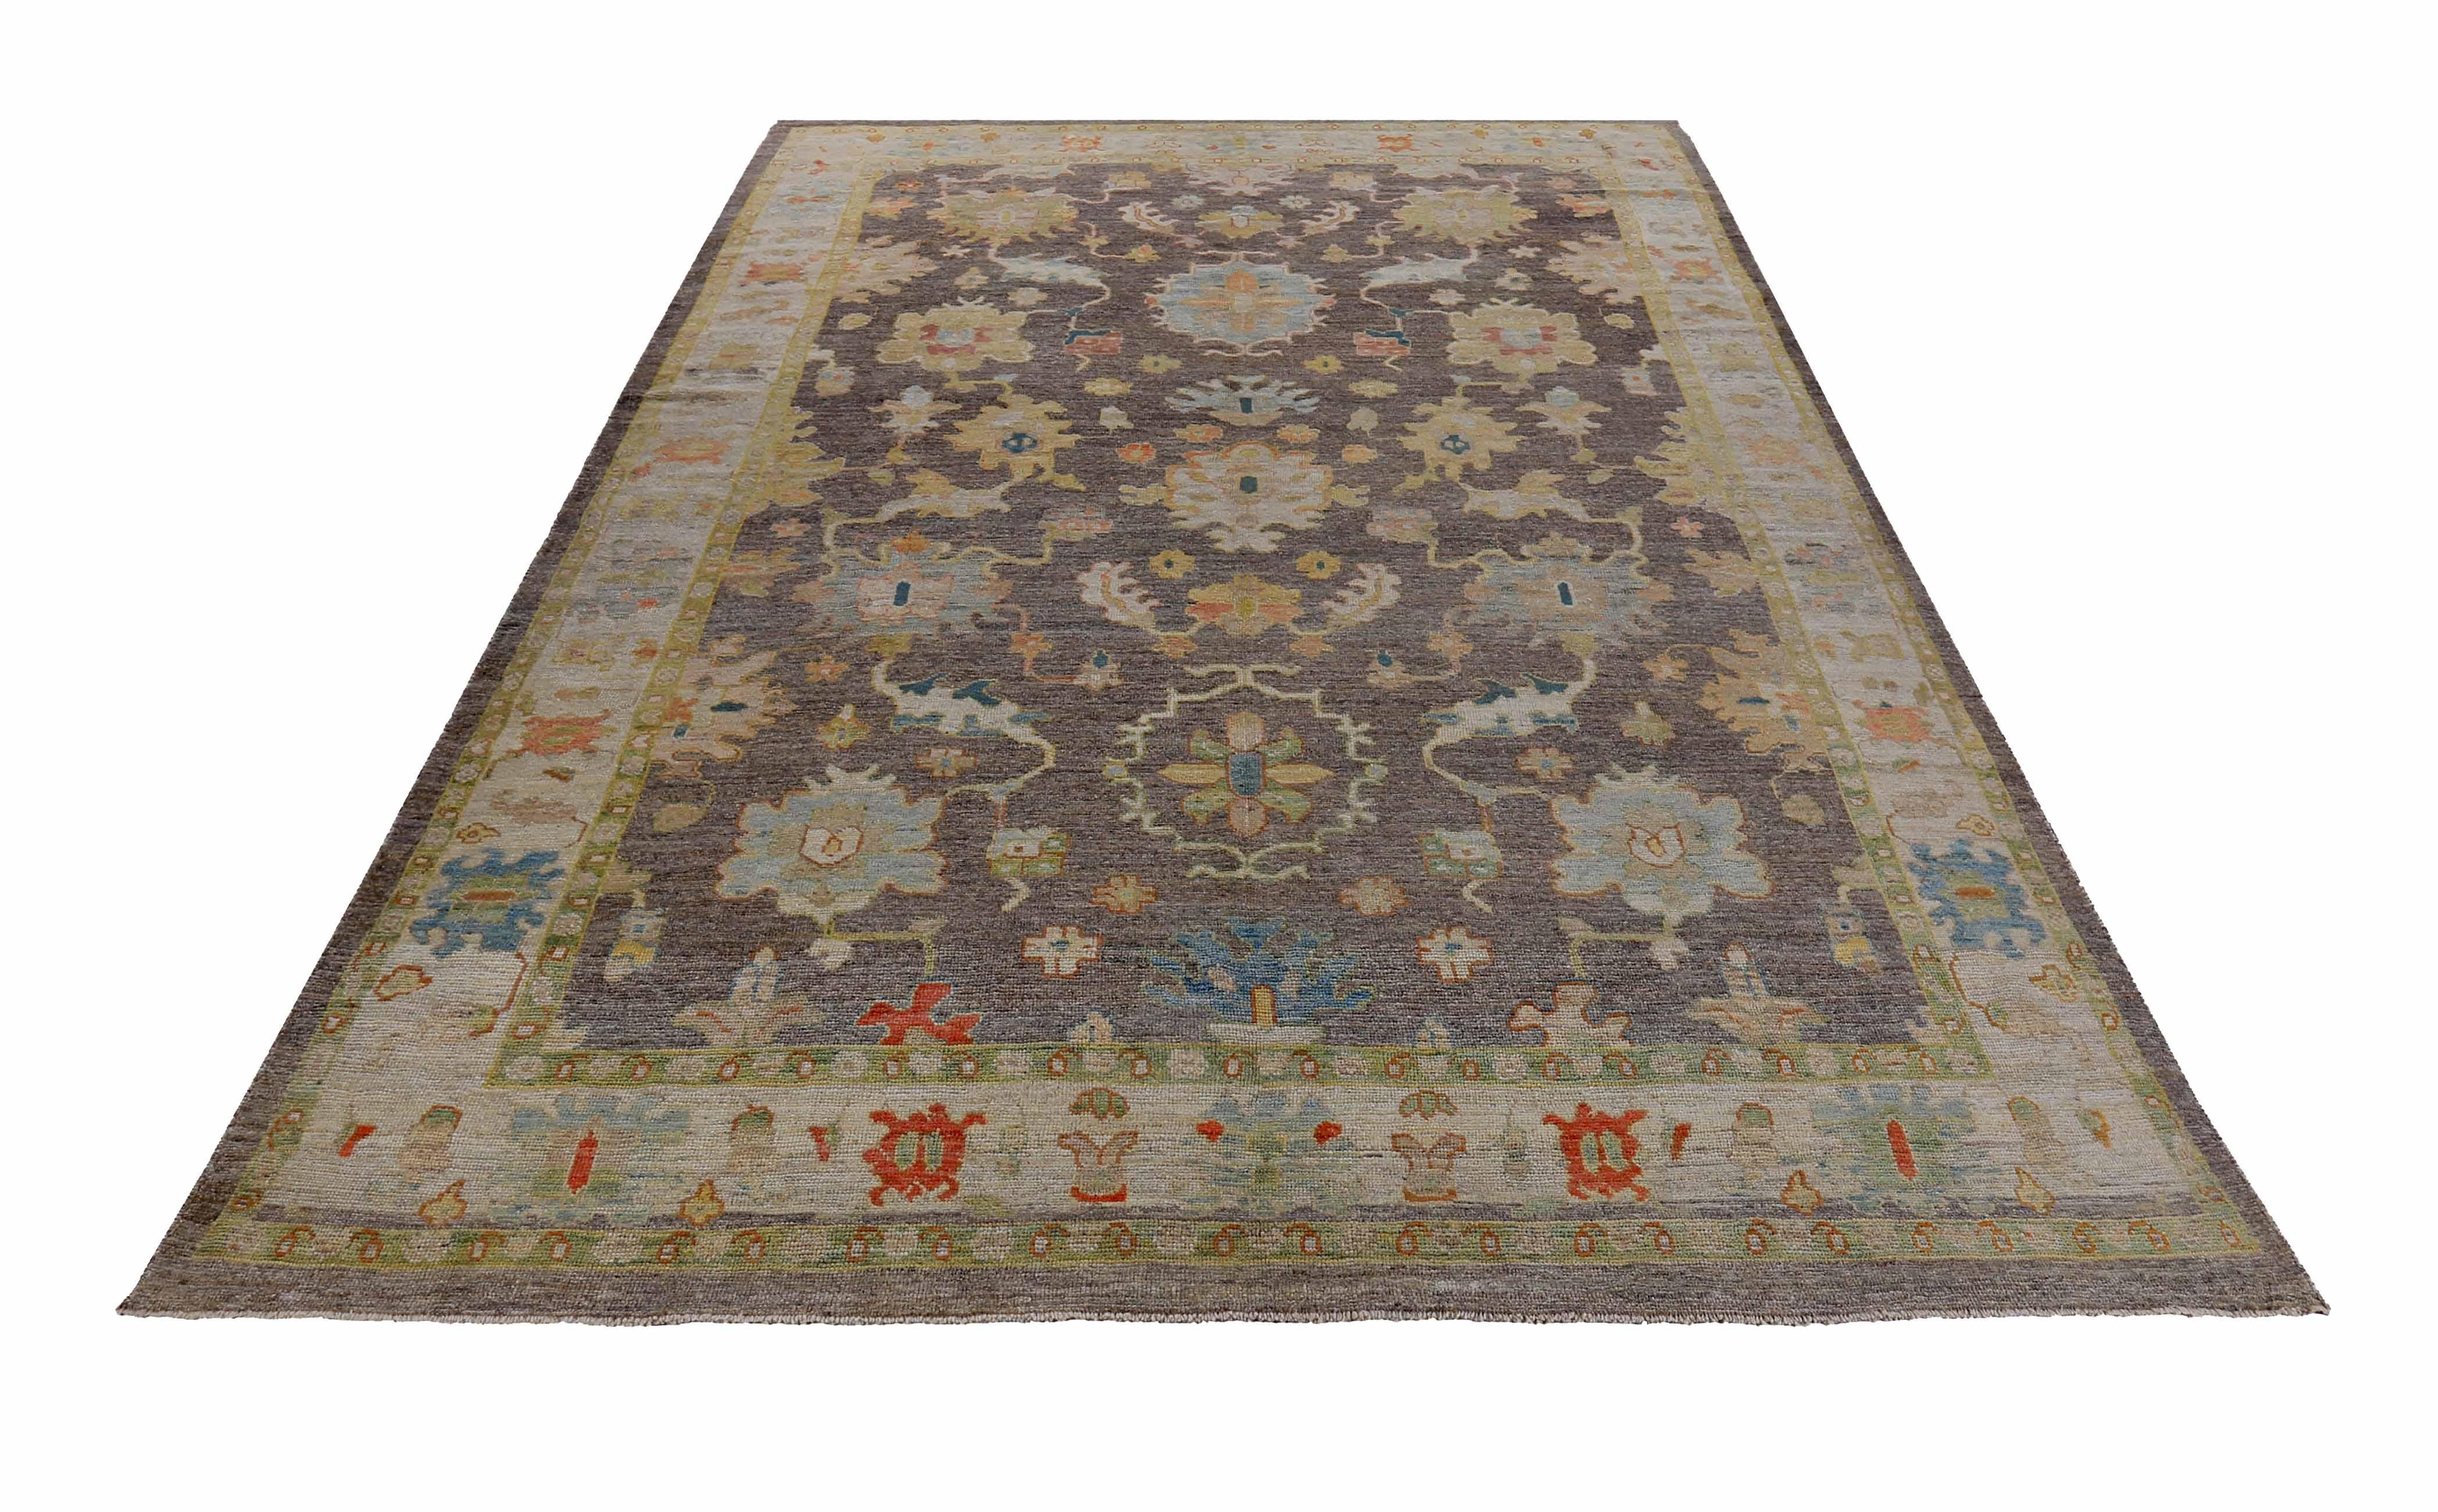 New Turkish rug made of handwoven sheep’s wool of the finest quality. It’s colored with organic vegetable dyes that are certified safe for humans and pets alike. It features green and pink floral details on a lovely brown field. Flower patterns are